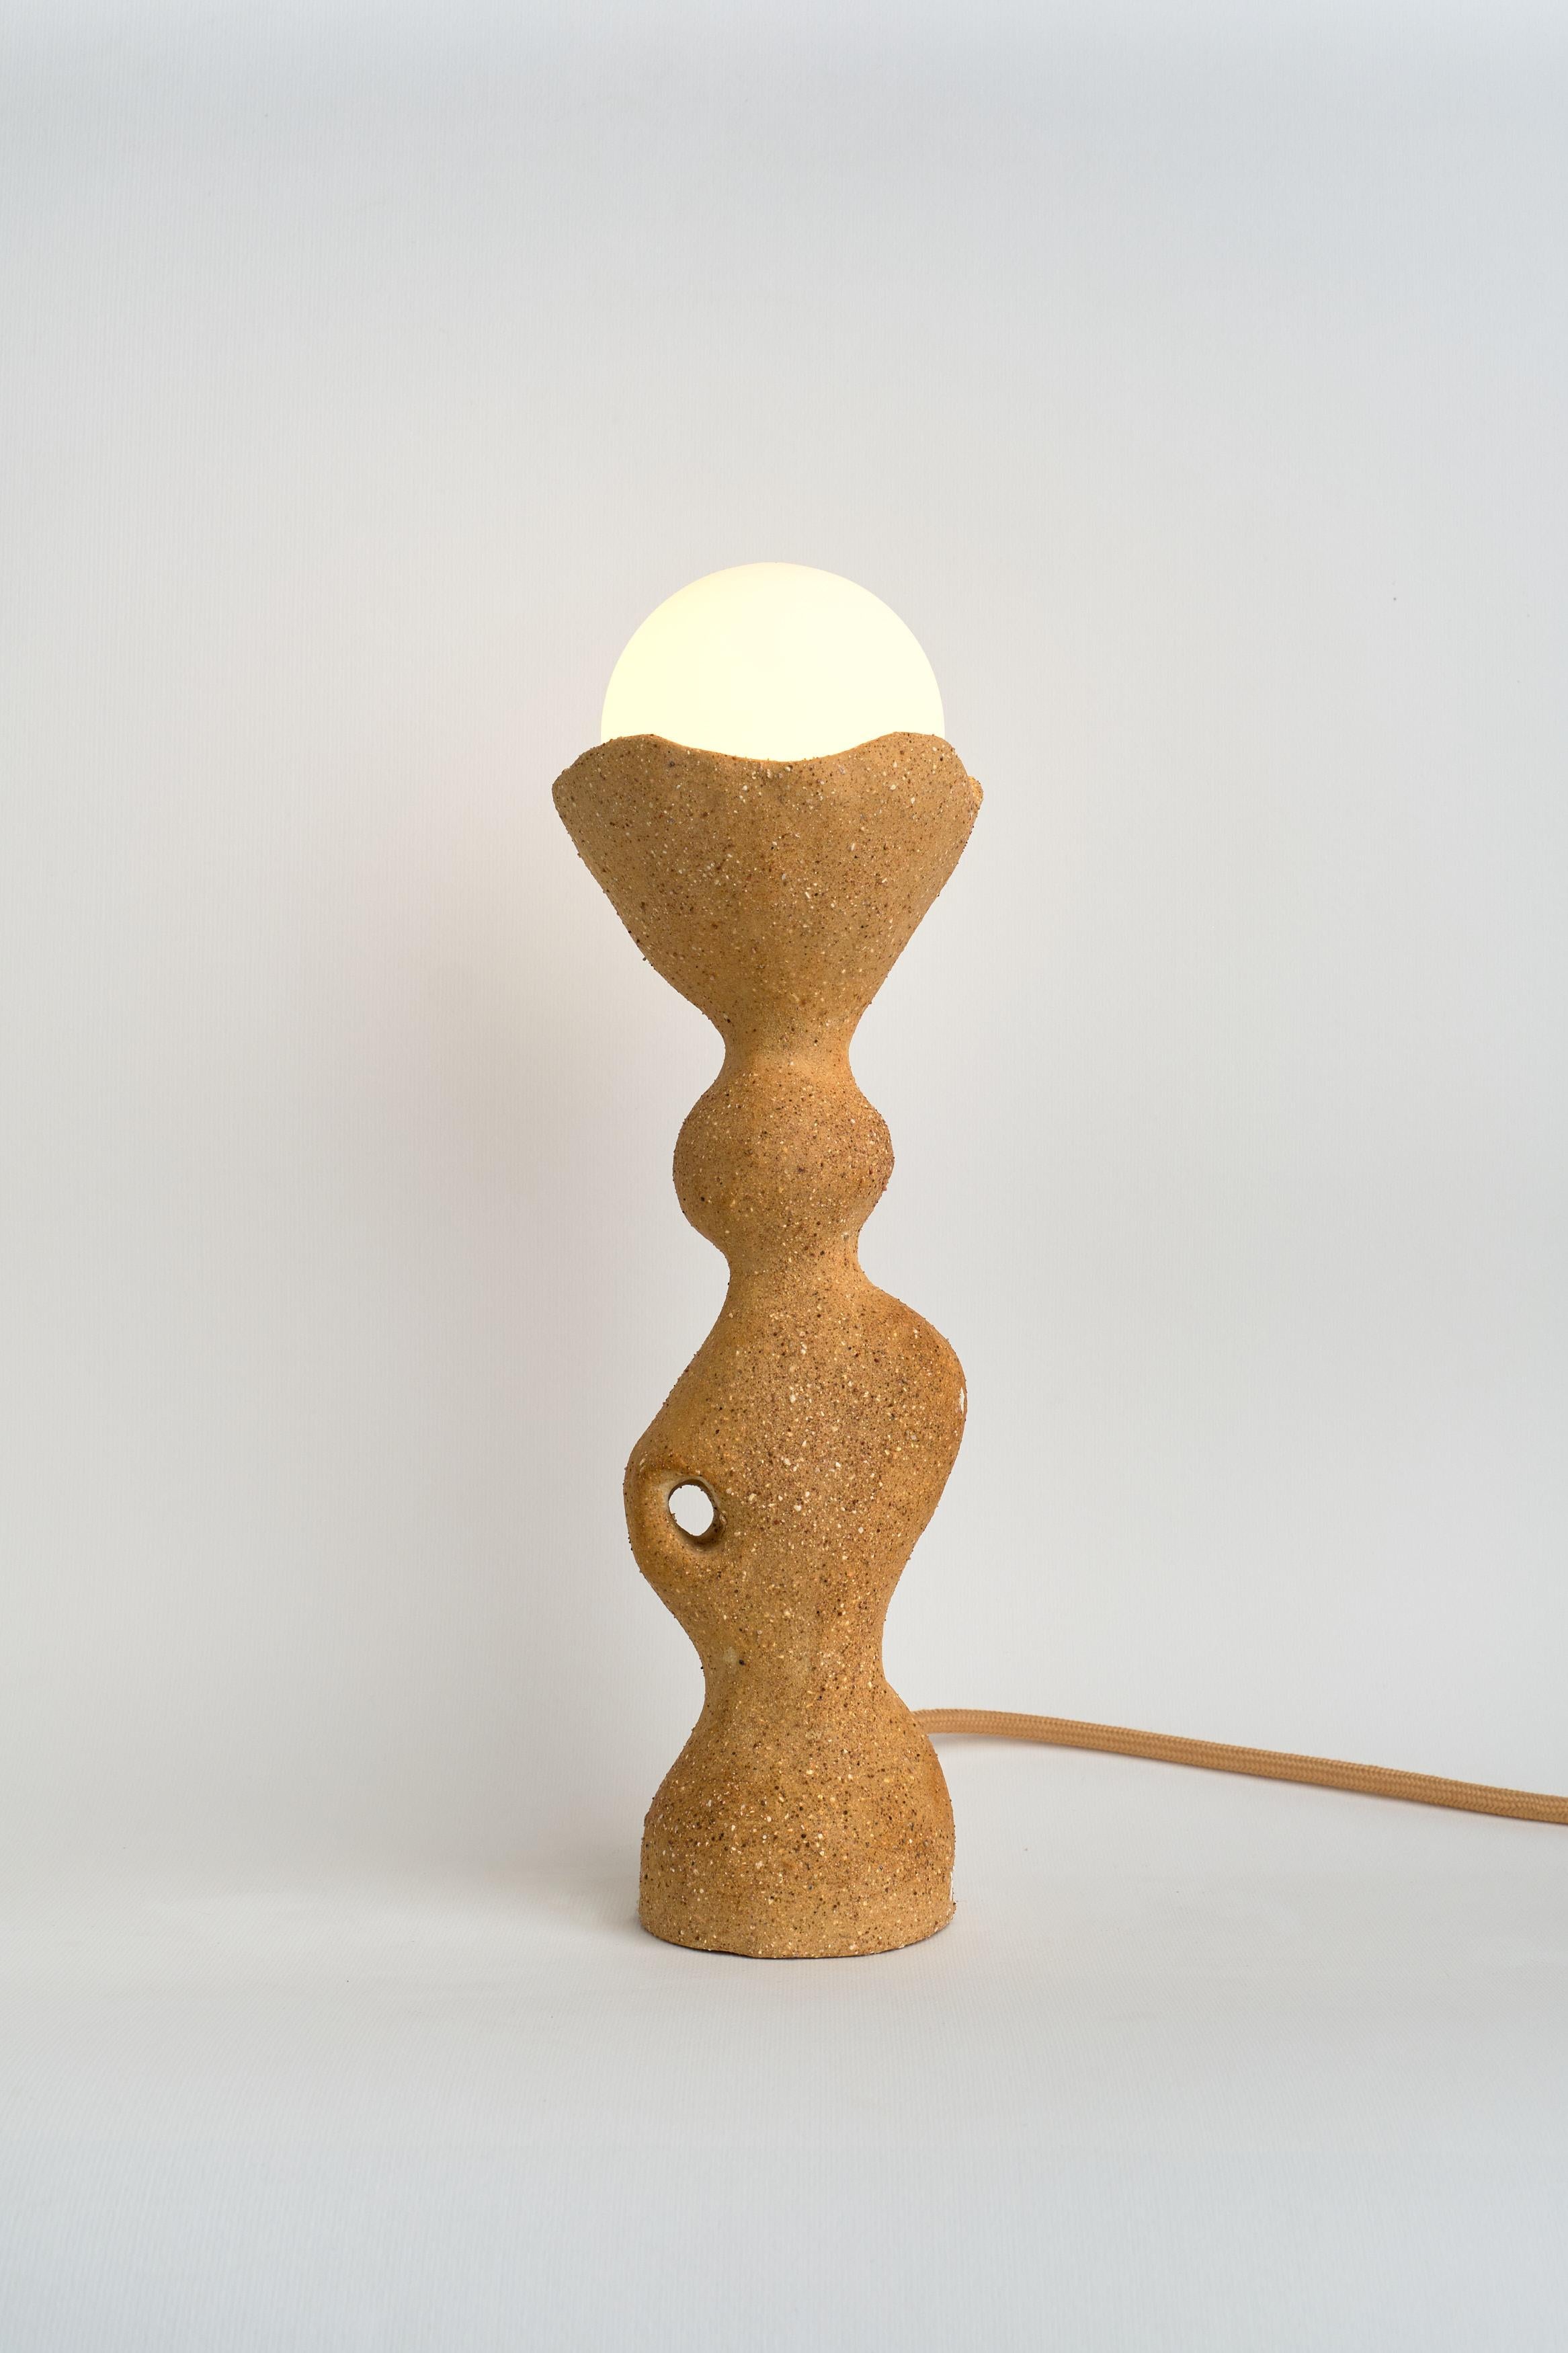 Totem I Table Lamp by Camila Apaez
Unique
Materials: Stoneware, Clay
Dimensions: ⌀ 10 x H 31 cm

Ila Ceramica emerged from a process of inner inquiry where ceramics became a space for presence, silence, touch and patience. Camila discovered the